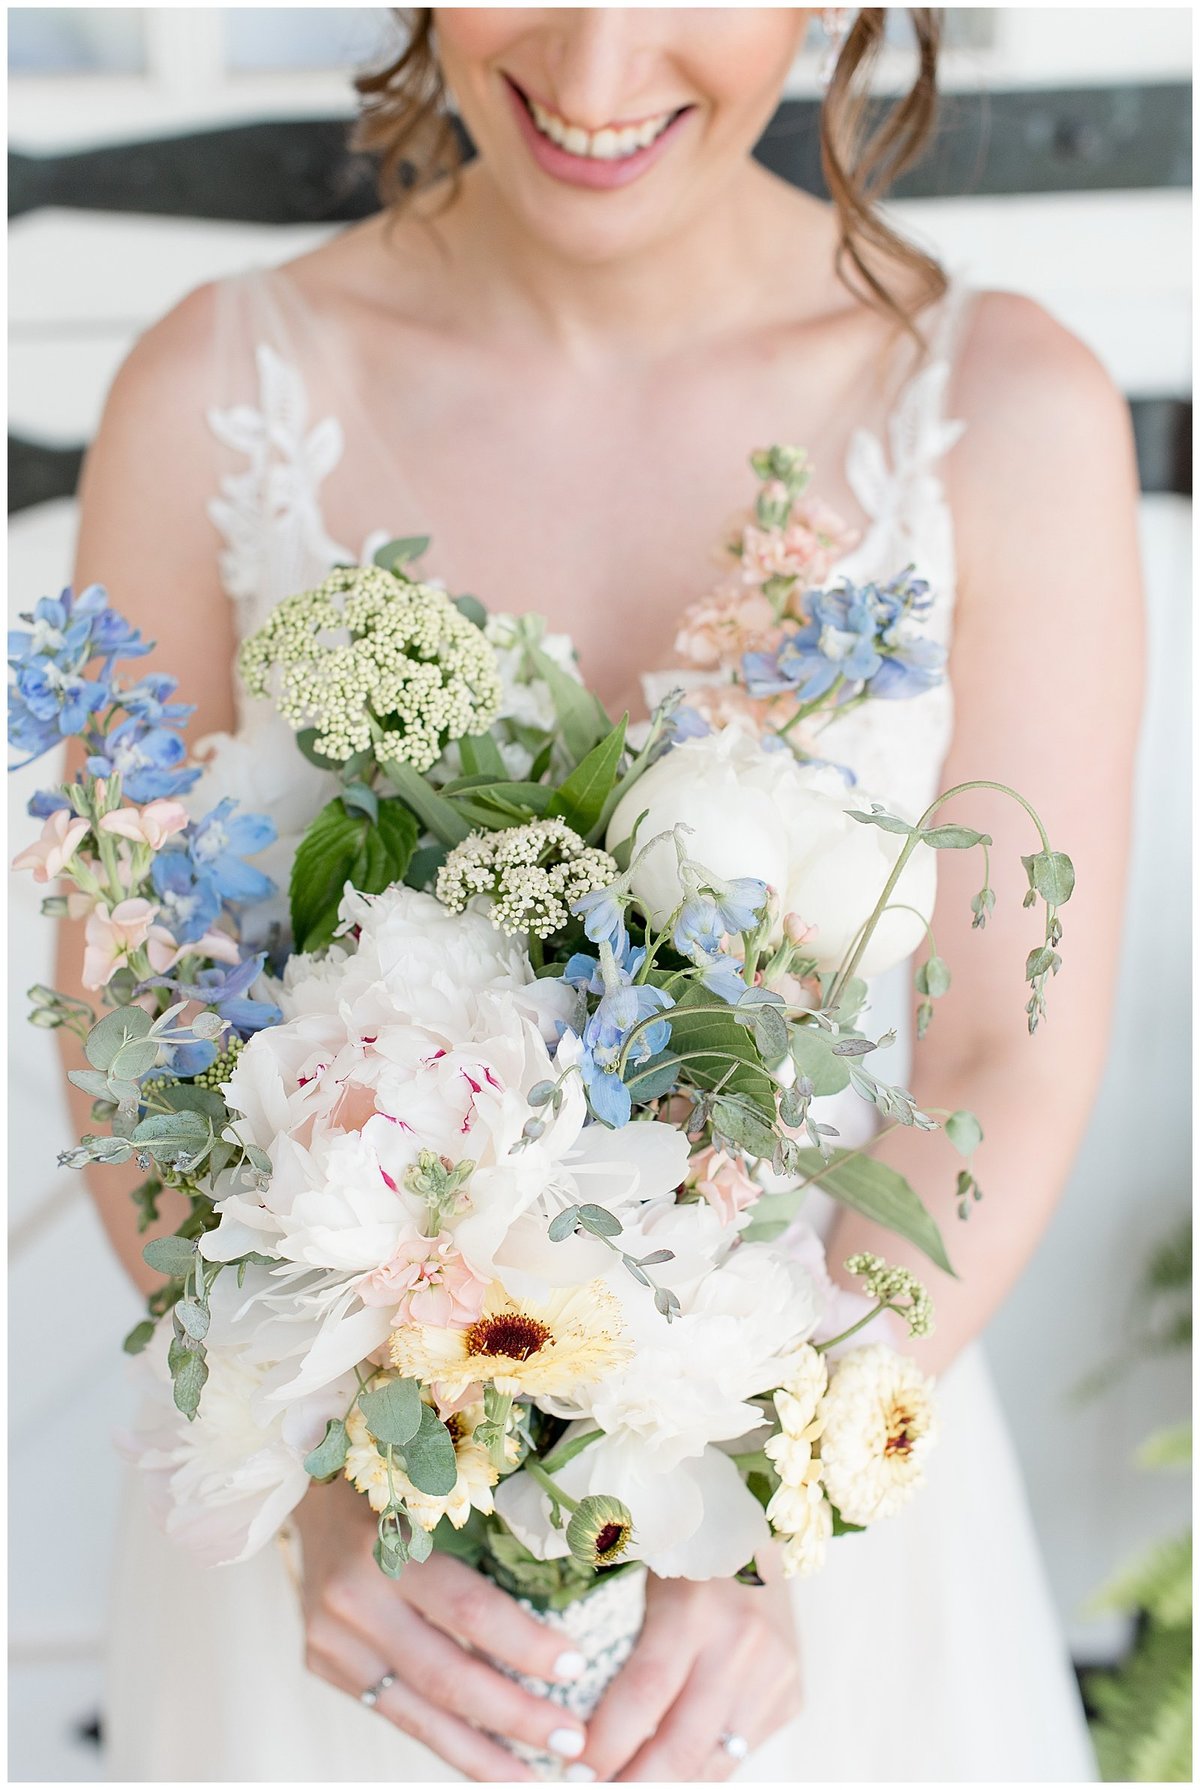 Colorful close-up photo of bridal bouquet filled with dahlias, eucalyptus, and other colorful flowers.